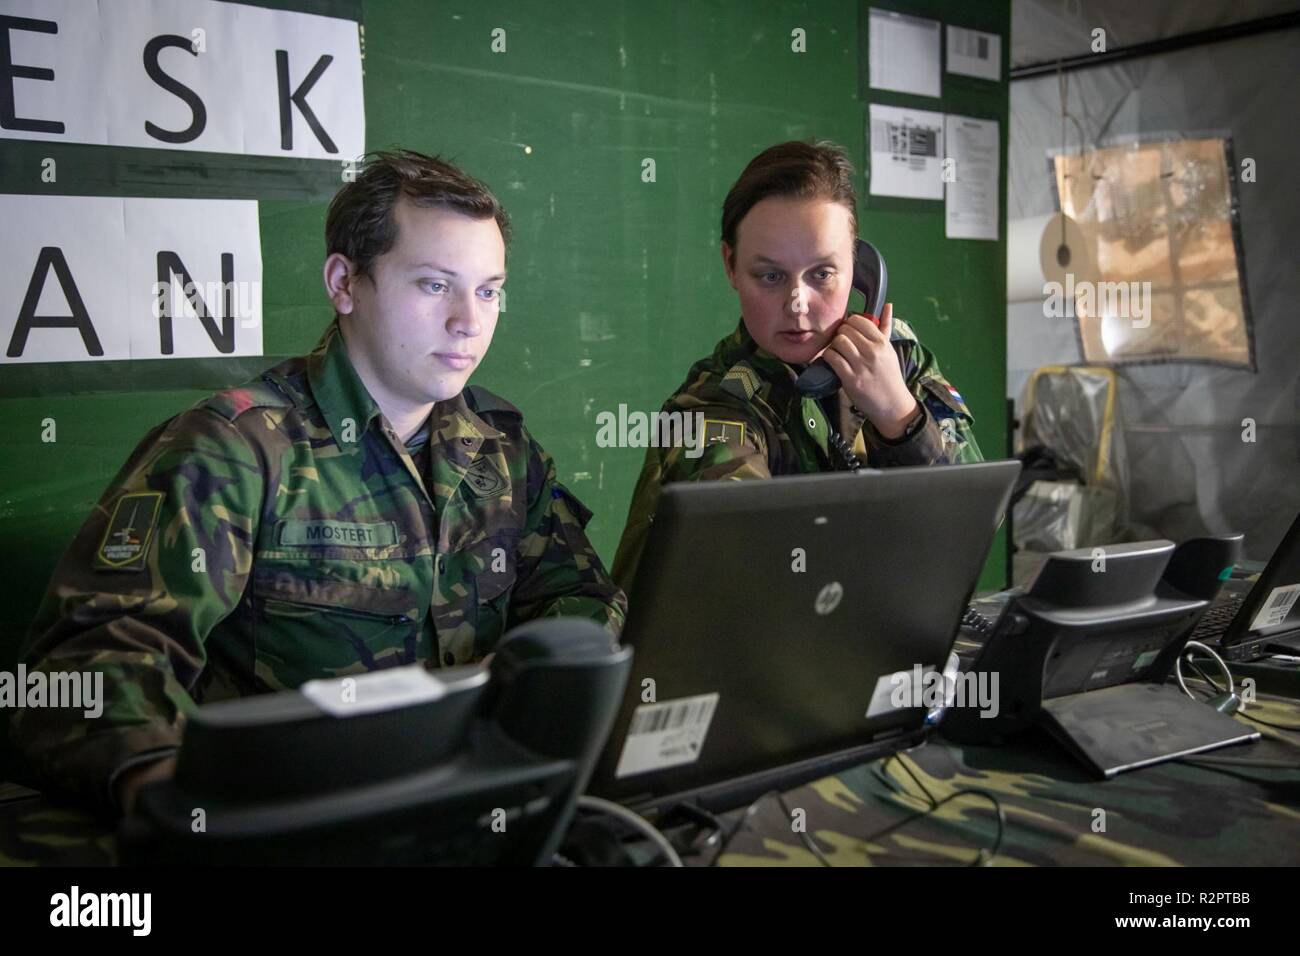 The soldiers in the help desk can assist the Italian soldiers day and night with any CIS requirements. 1 German/Netherlands Corps' Communication and Information Systems Battalion is responsible for the communication between the Headquarters and its brigades. RACE 1 provides the CIS link between 1GNC as LCC and the Italian Ariete Brigade for Exercise Trident Juncture.    With around 50,000 personnel participating in Trident Juncture 2018, it is one of the largest NATO exercises in recent years. Around 250 aircraft, 65 vessels and more than 10,000 vehicles are involved in the exercise in Norway. Stock Photo